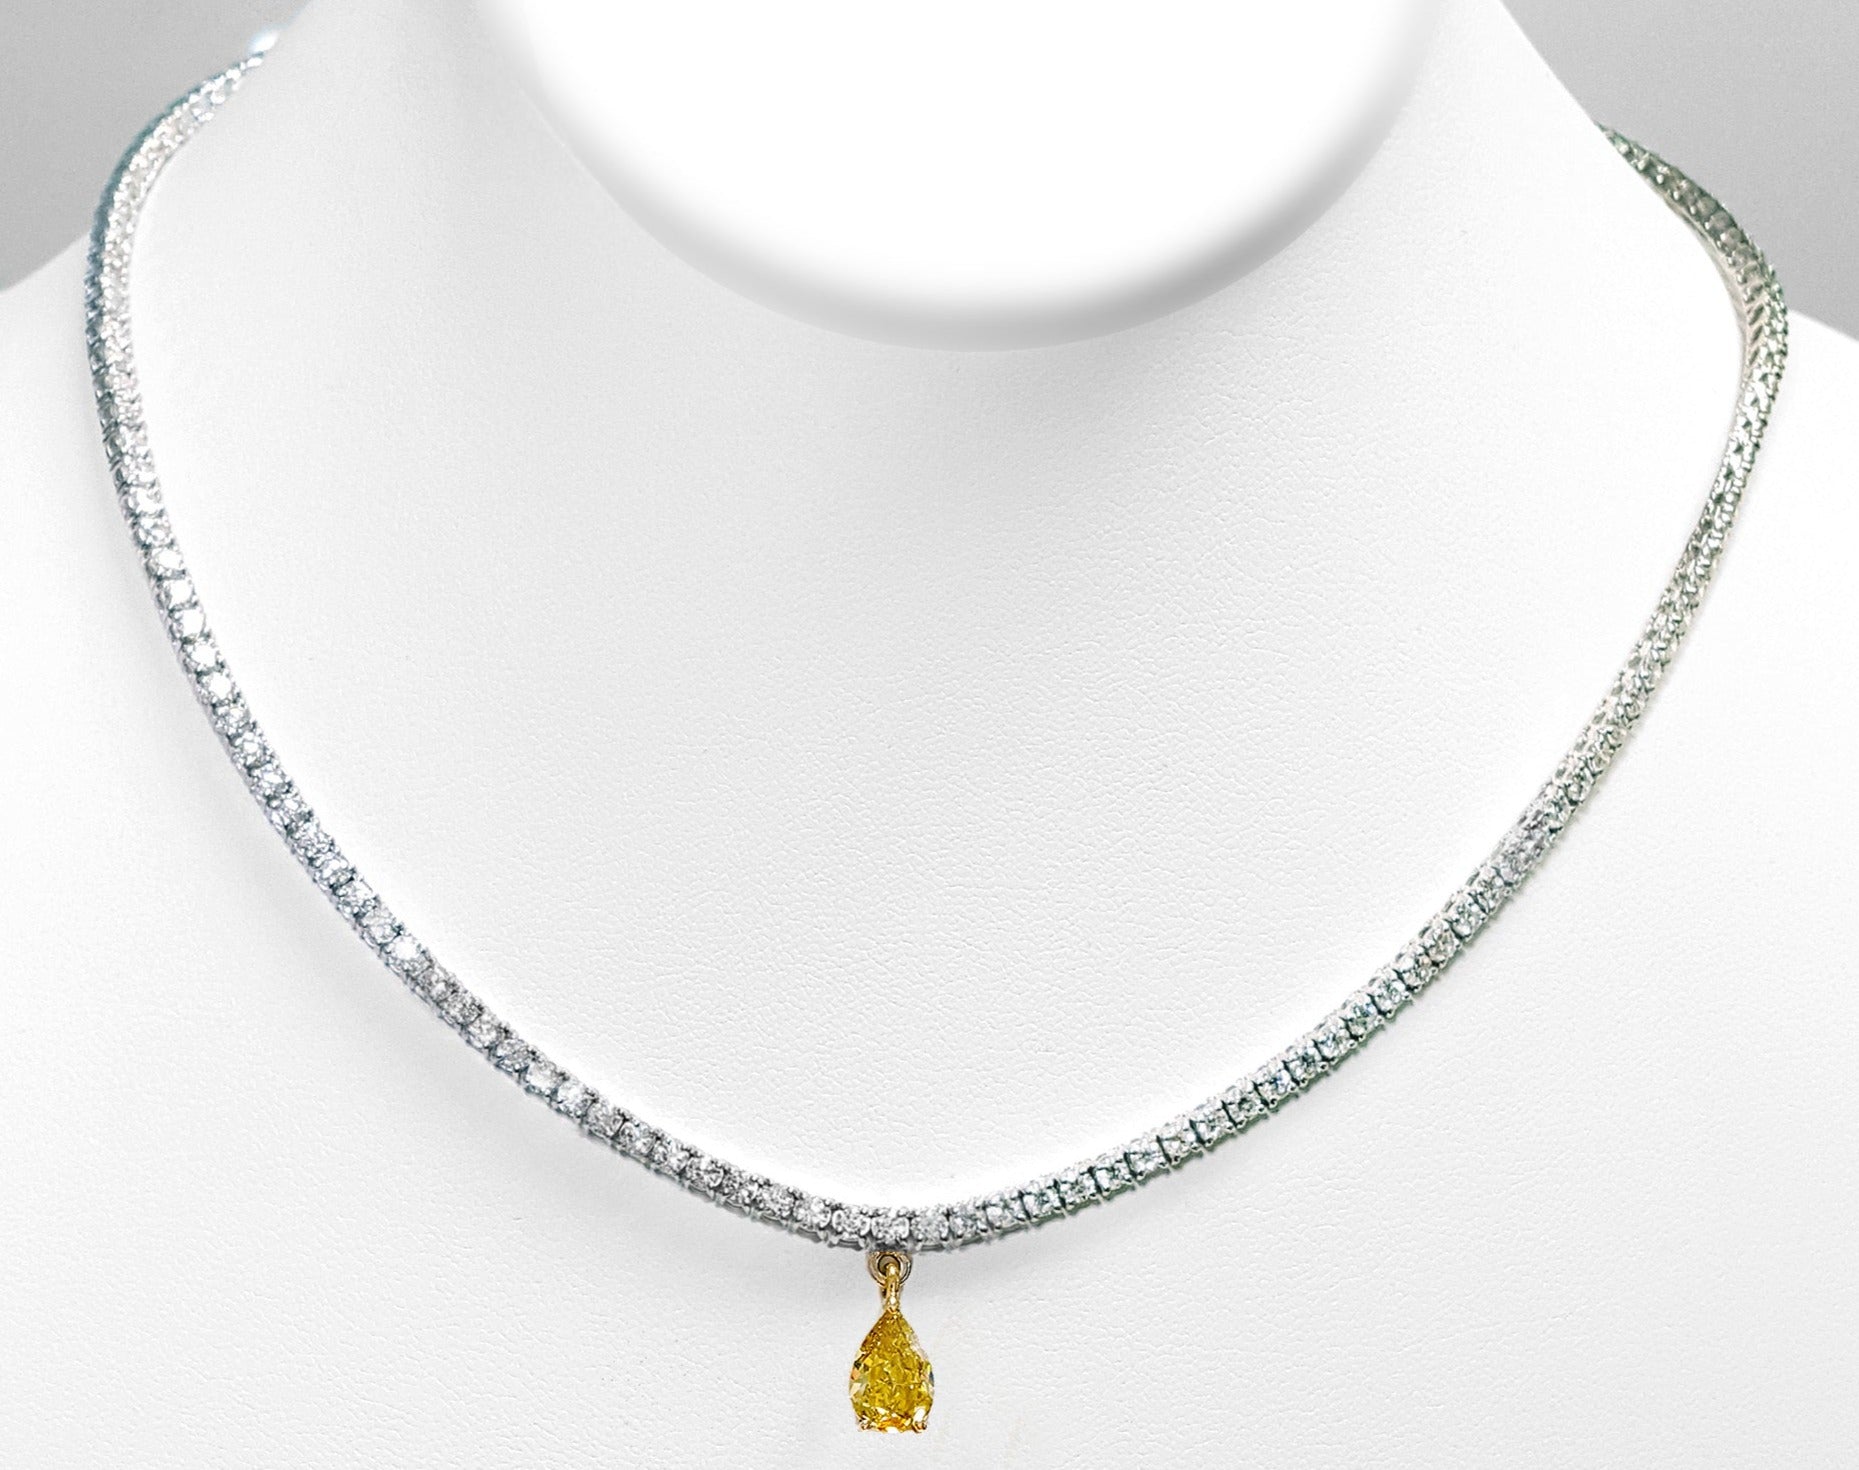 6.60carat Exquisite Diamond Tennis Line Necklace with Detacable GIA Certified Canary Fancy Deep Yellow Pear Diamond Drop